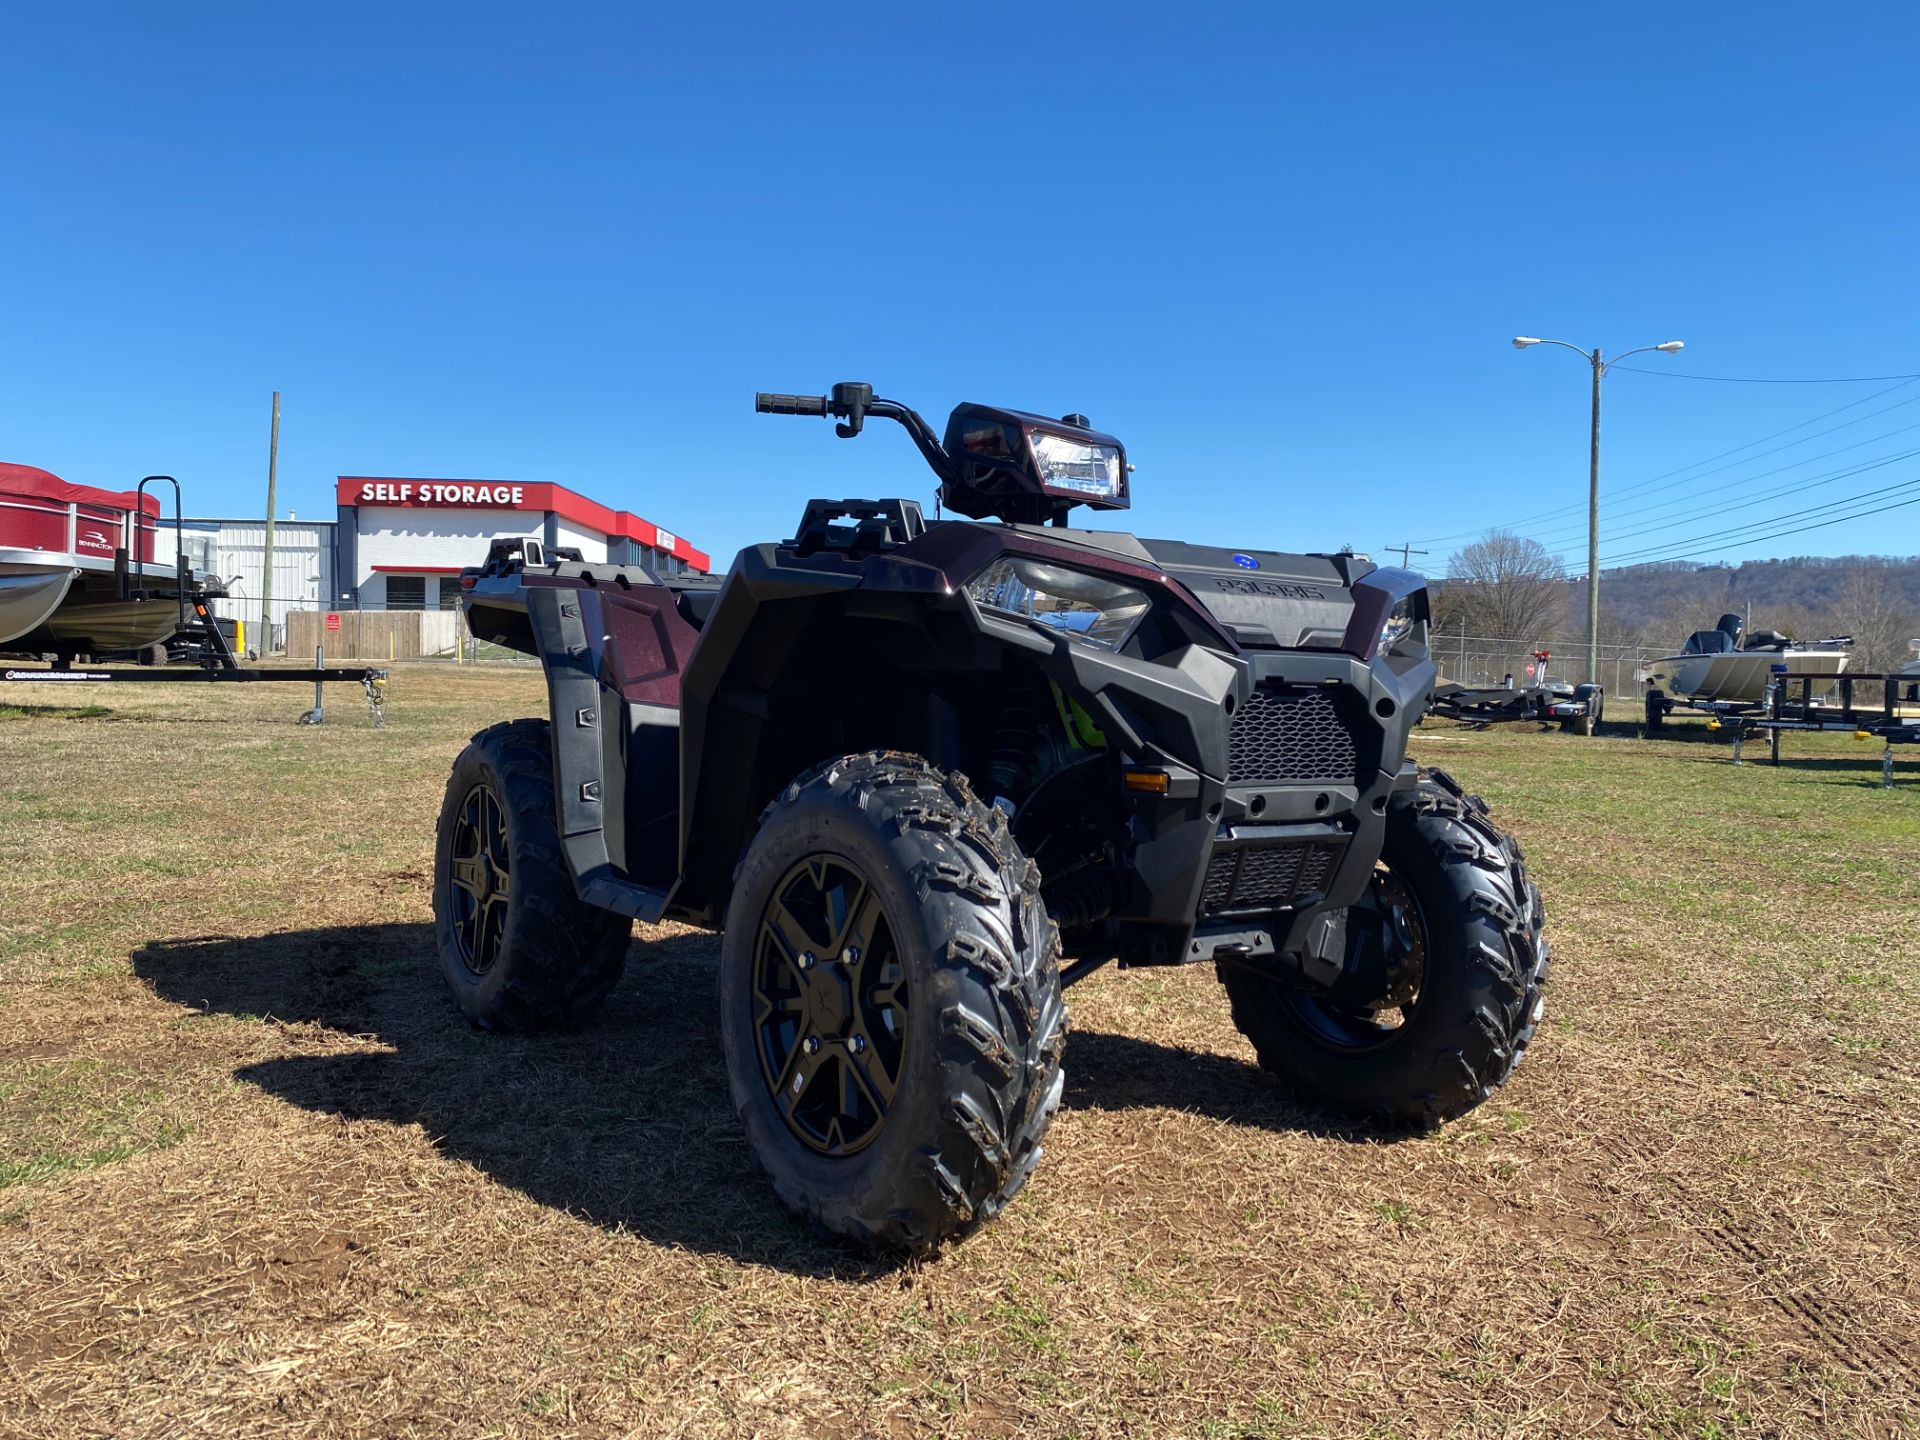 2024 Polaris Sportsman 850 Ultimate Trail in Ooltewah, Tennessee - Photo 1